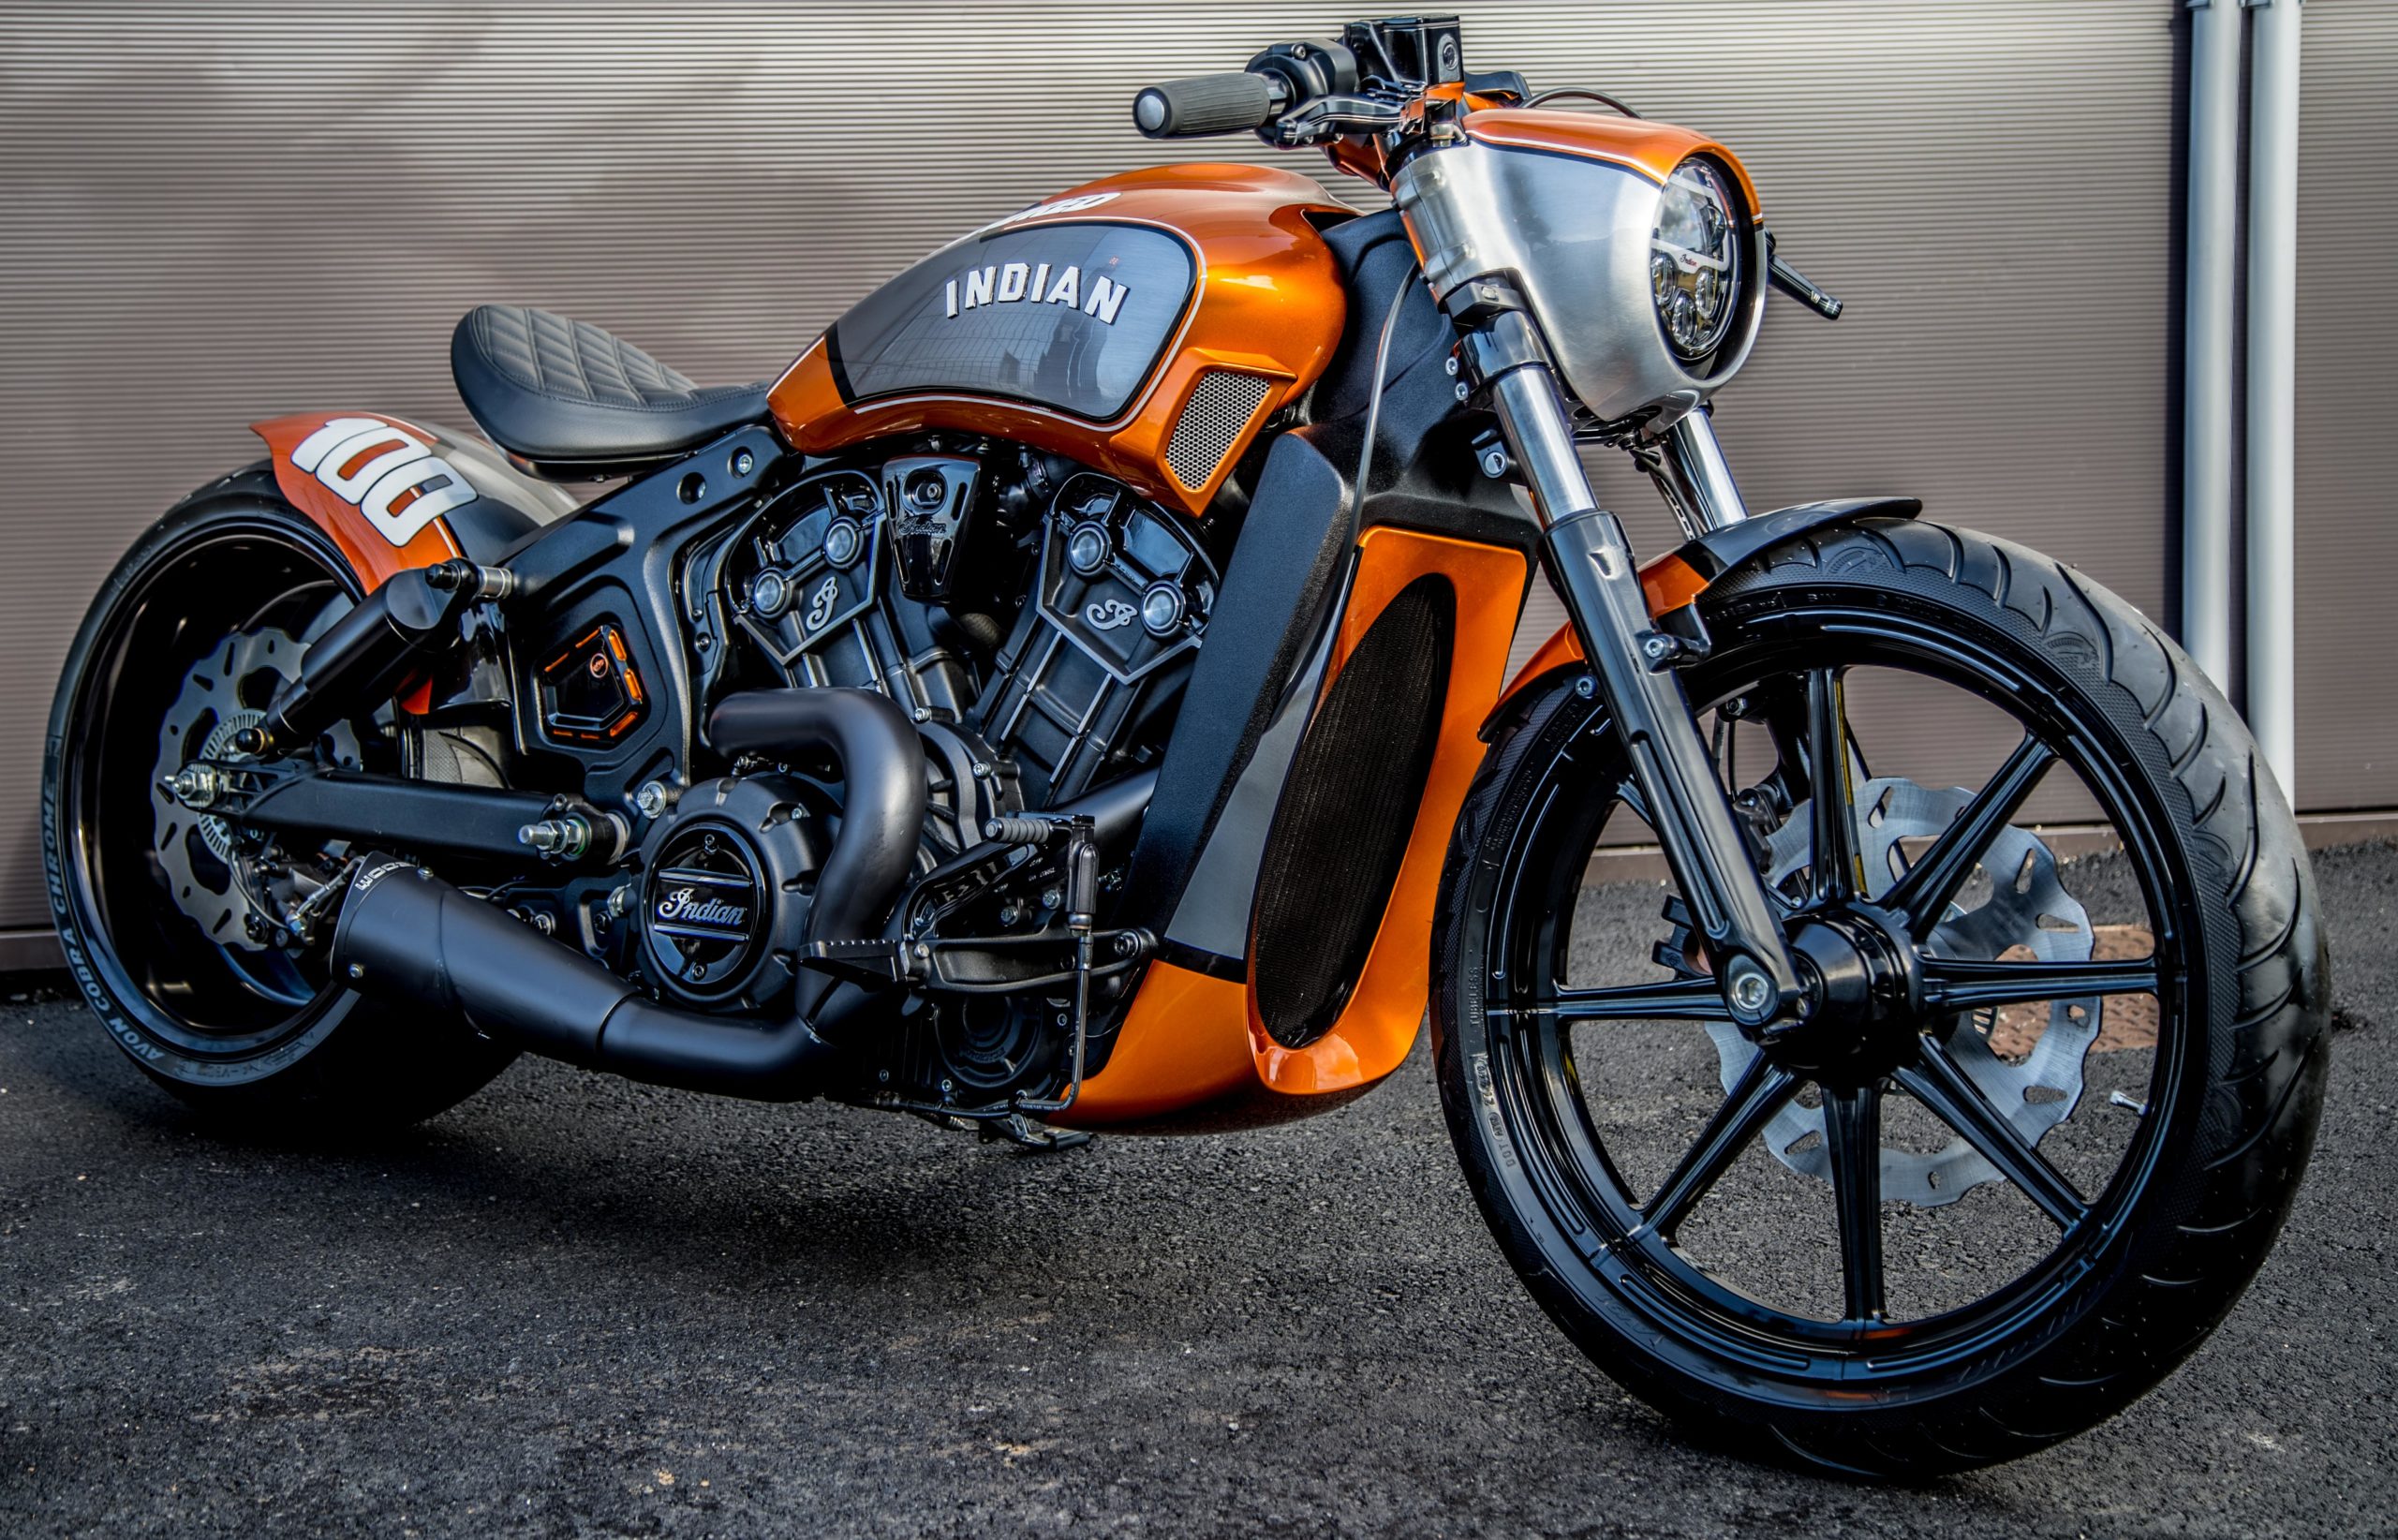 A view of "The Hundred" custom Indian Motorcycle, courtesy of French dealer Indian Motorcycle Metz